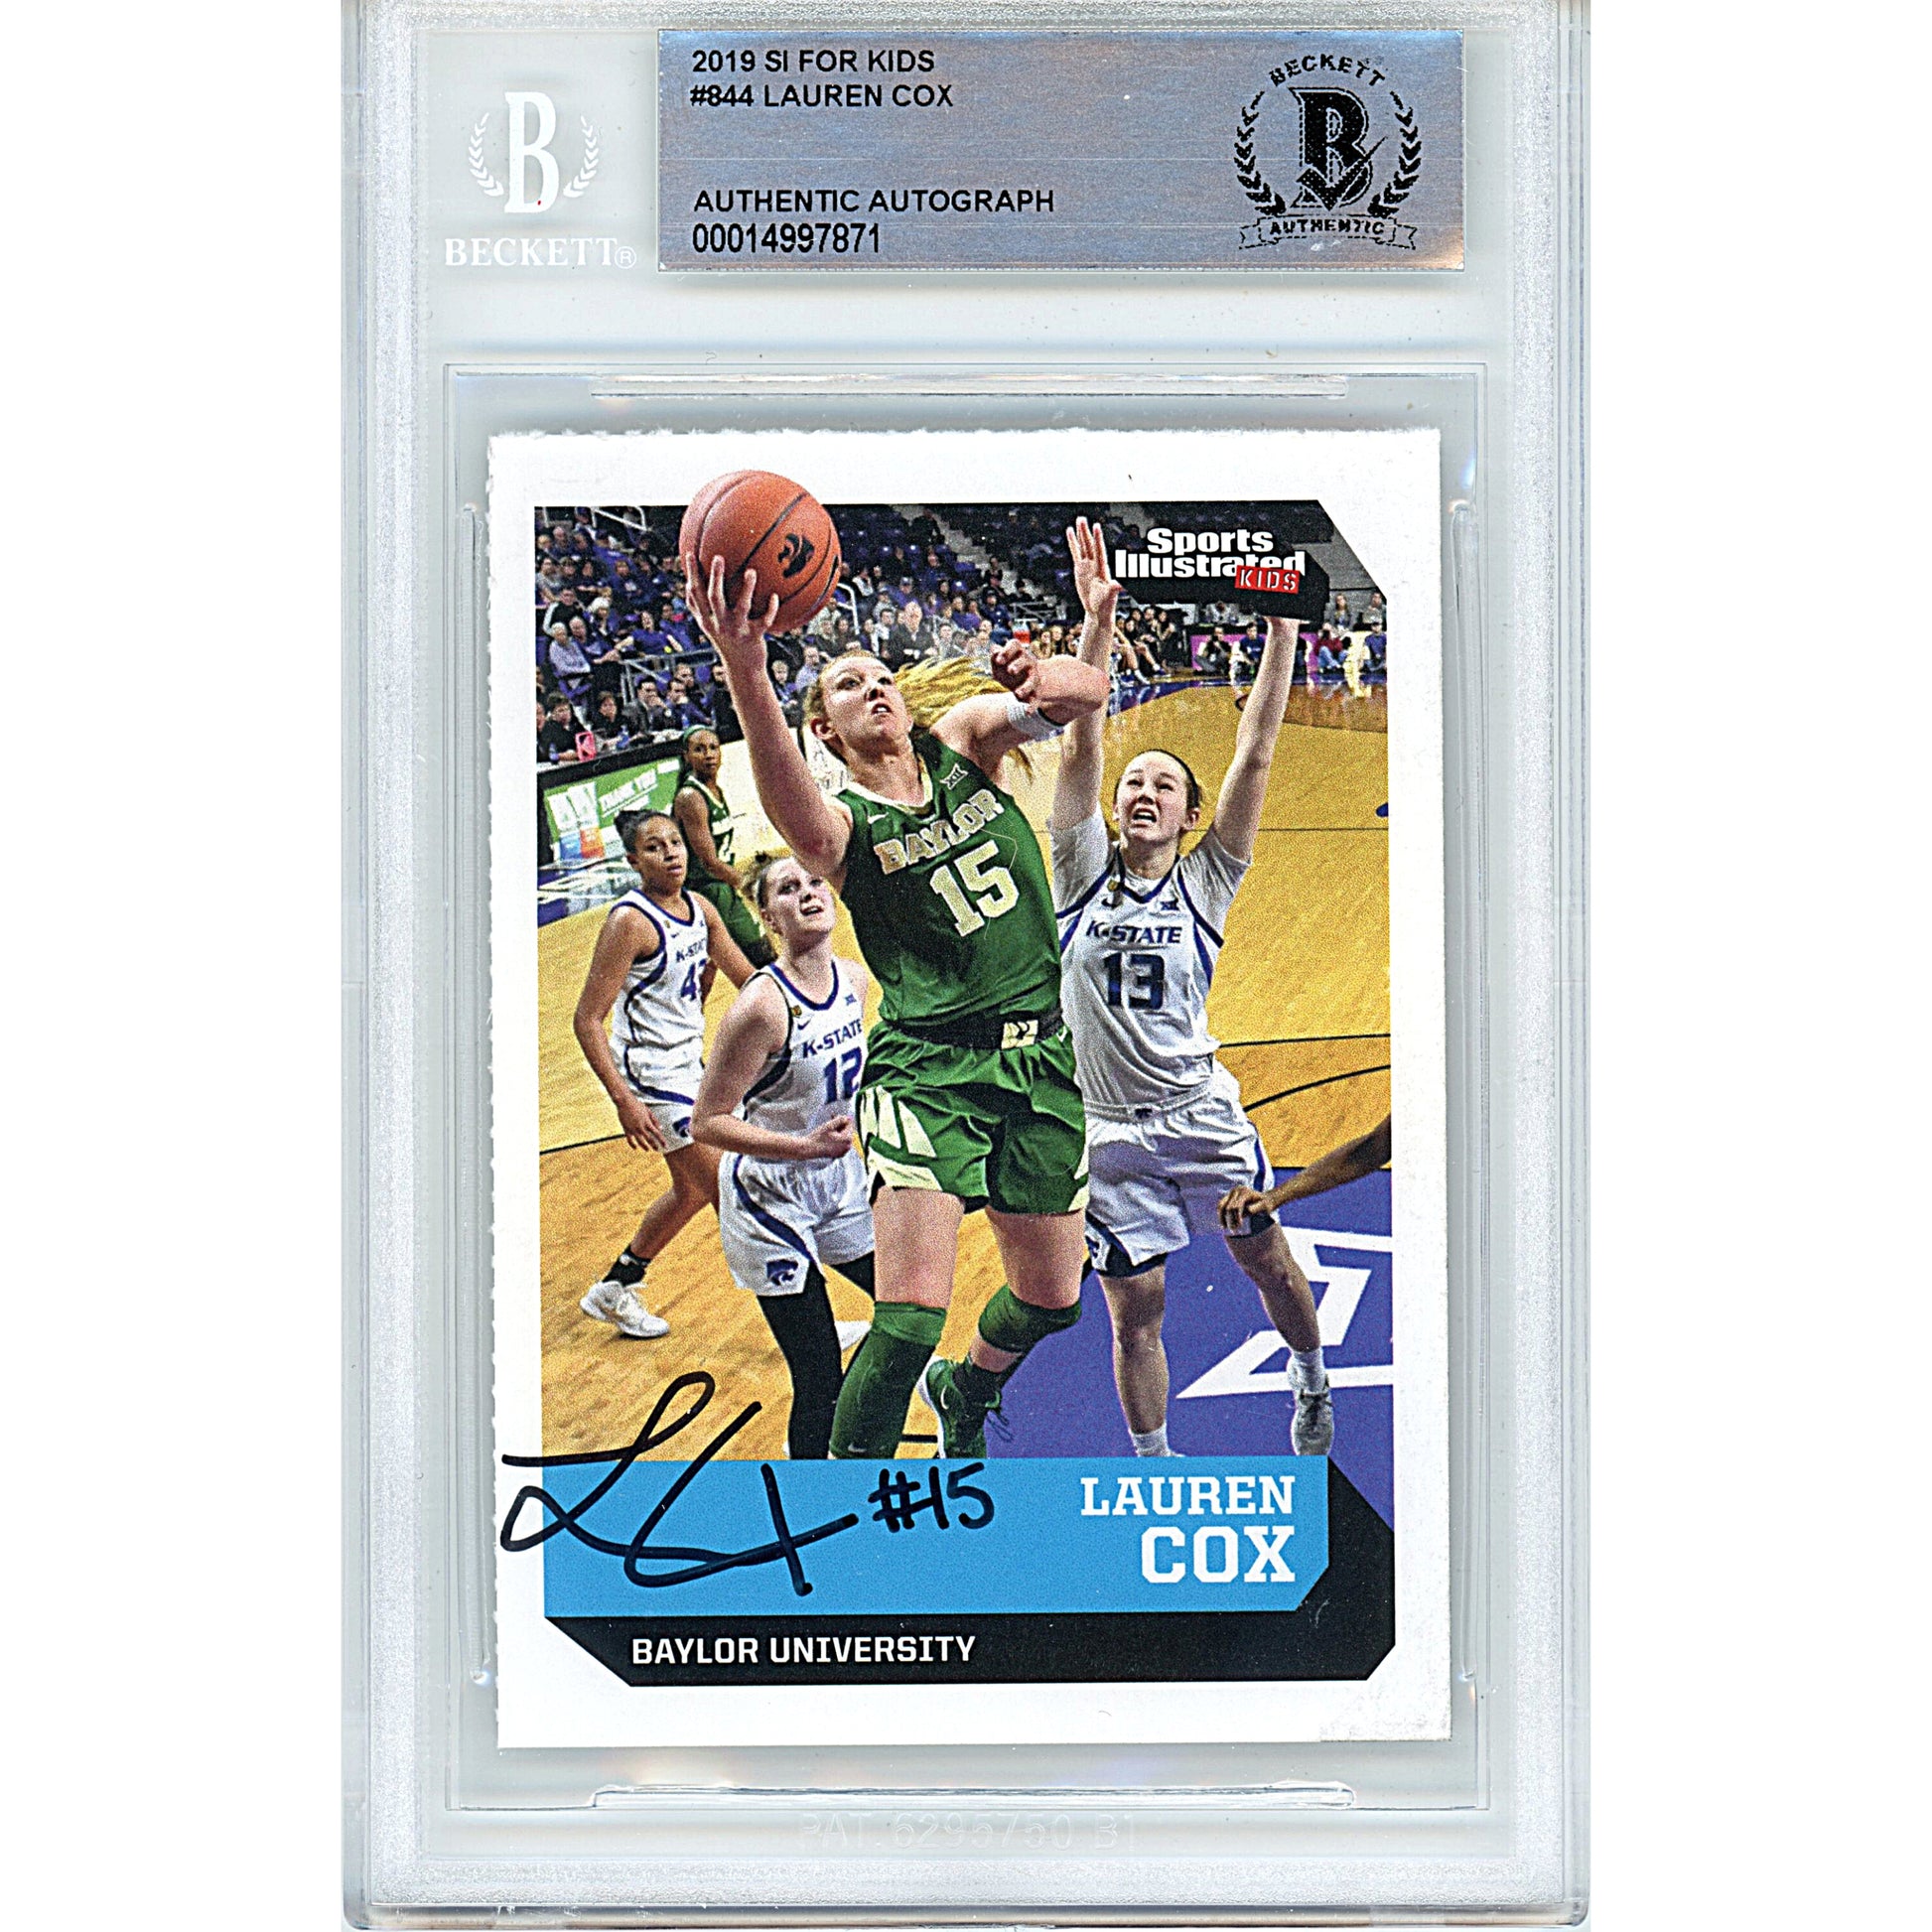 Basketballs- Autographed- Lauren Cox Signed Baylor Lady Bears 2019 Sports Illustrated for Kids Rookie Basketball Card Beckett Authentication Slabbed 00014997871 - 101